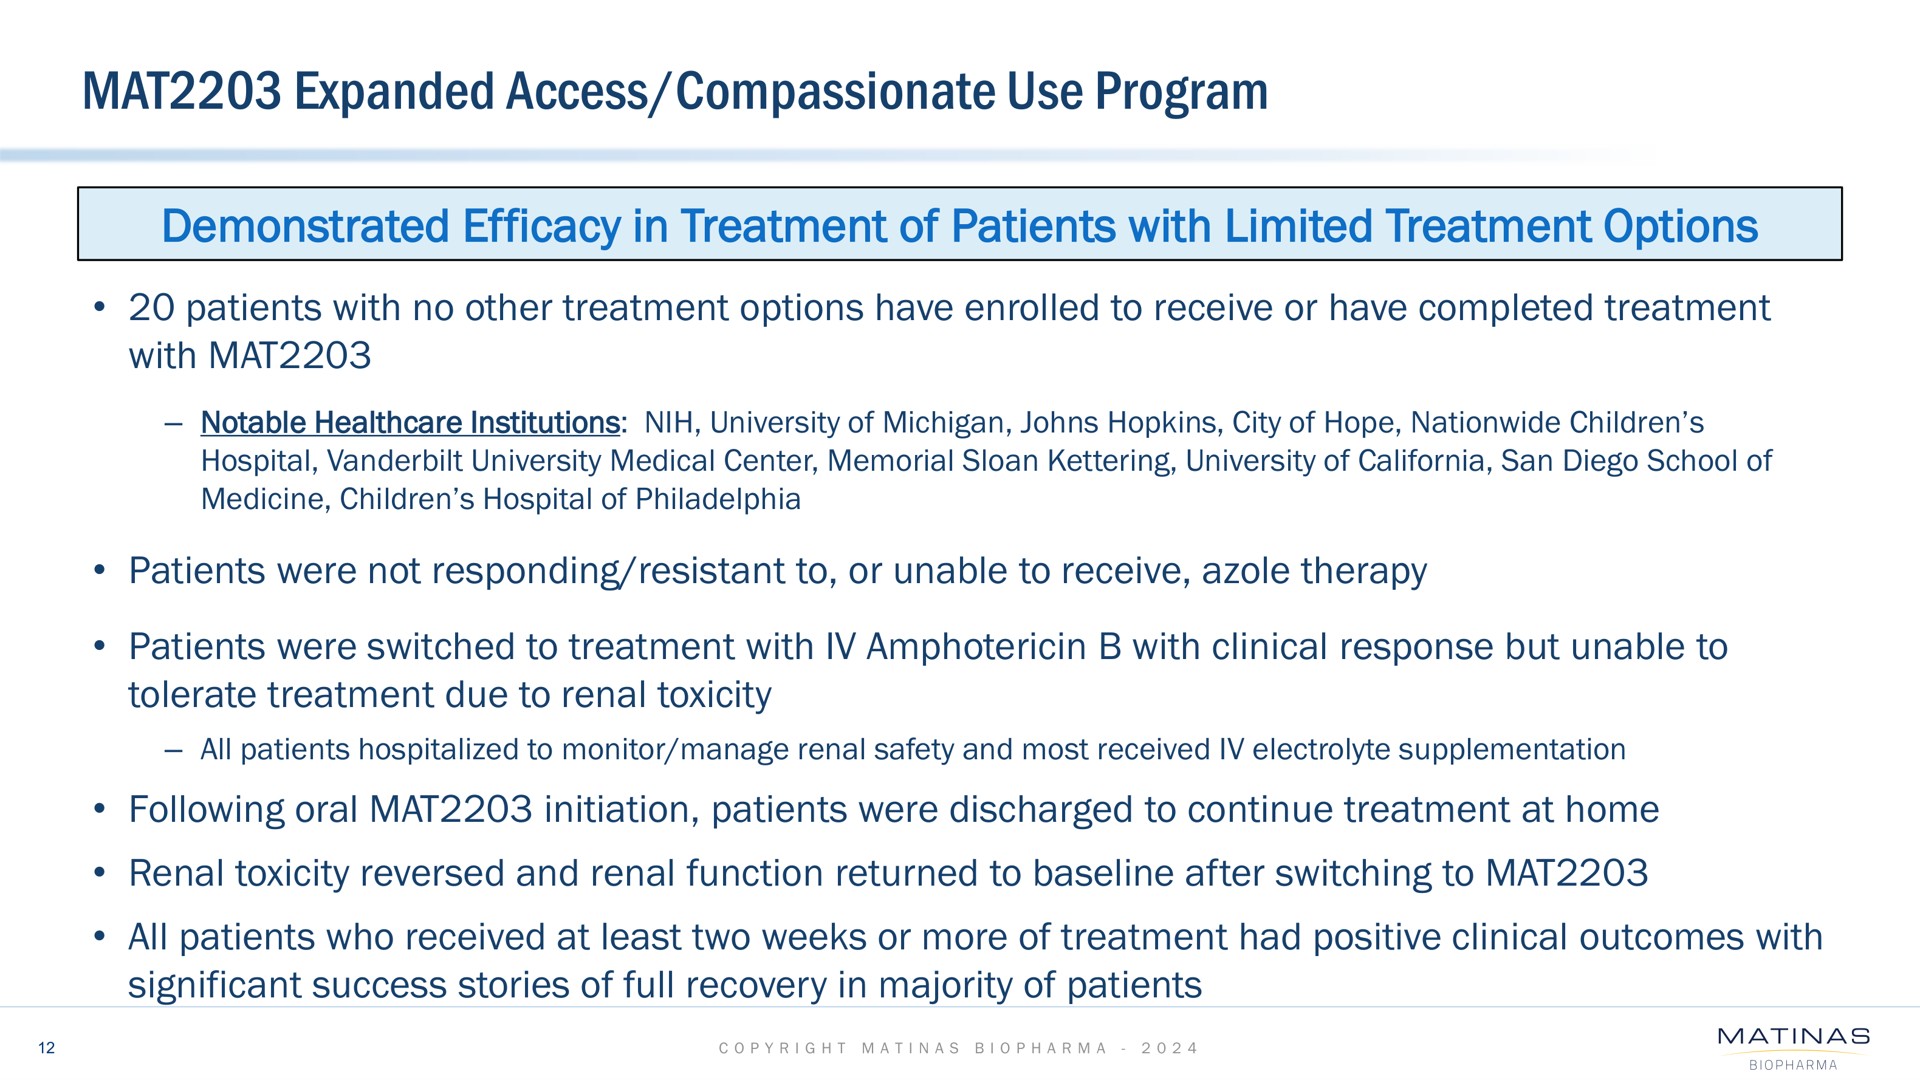 mat expanded access compassionate use program demonstrated efficacy in treatment of patients with limited treatment options | Matinas BioPharma